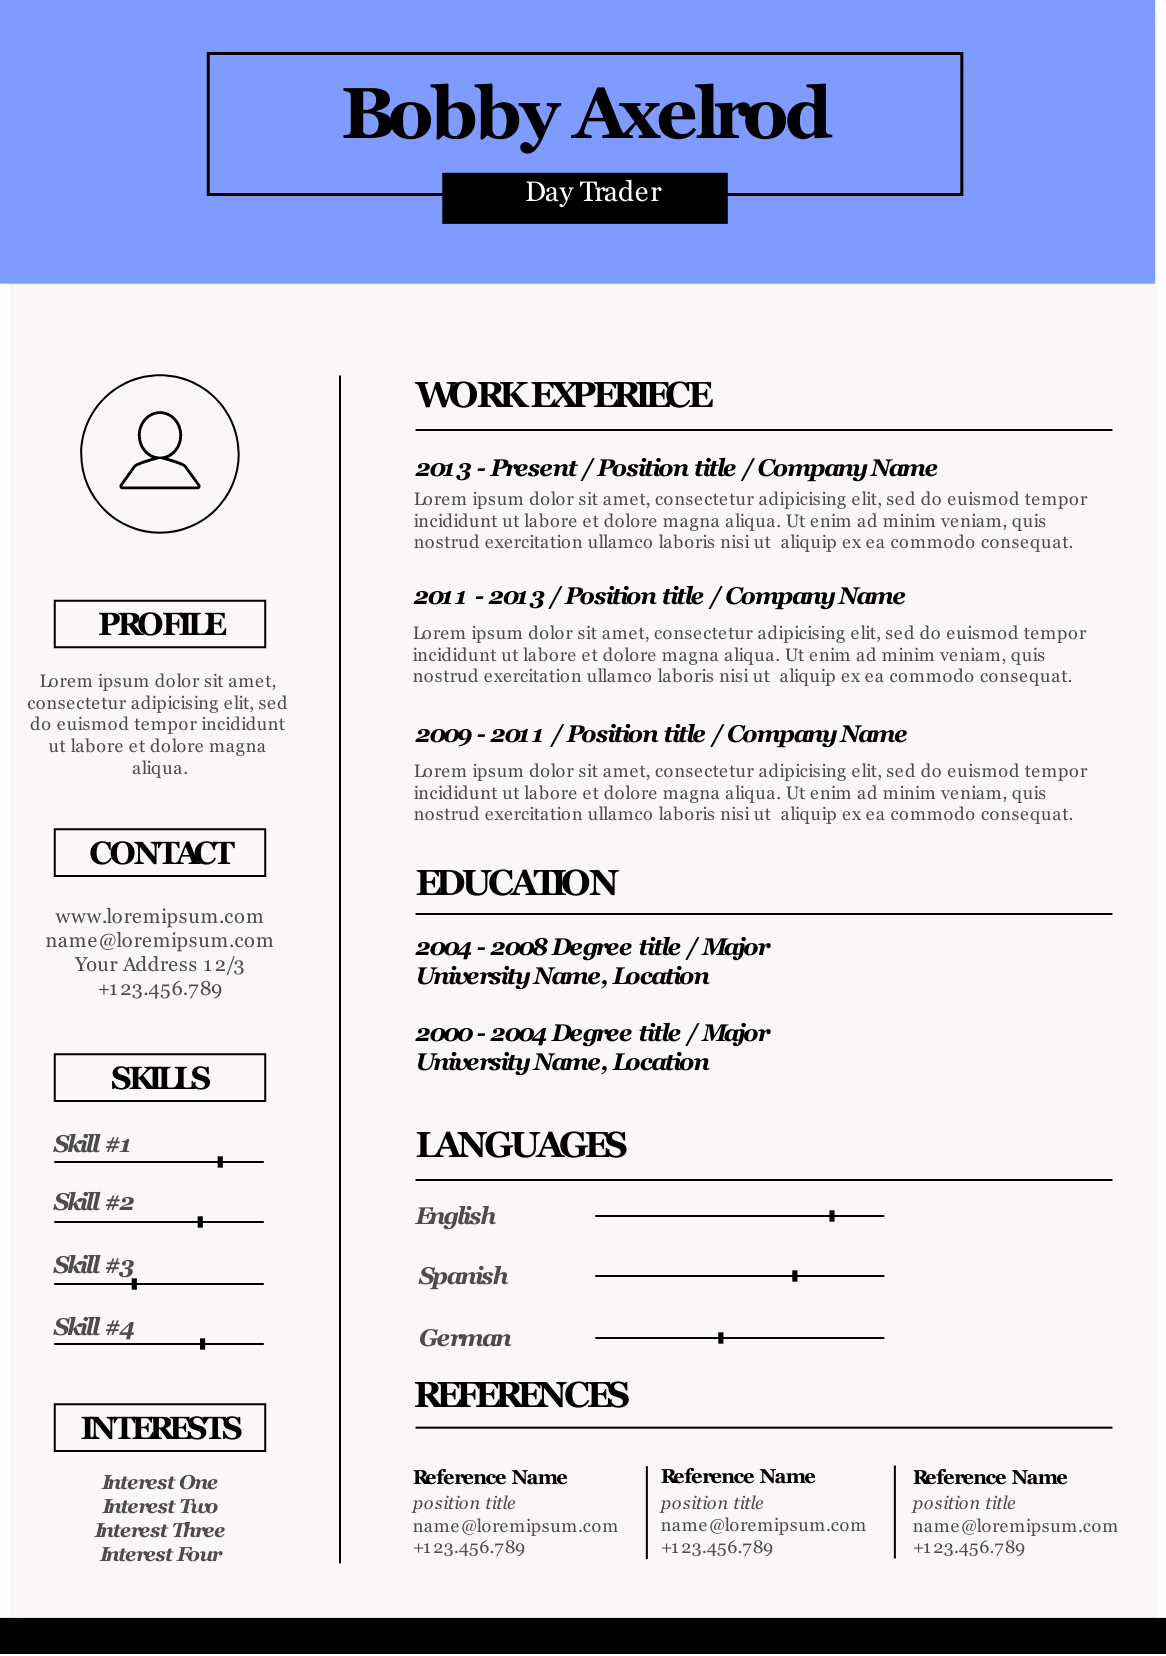 Infographic Resume Template for Successful Job Application